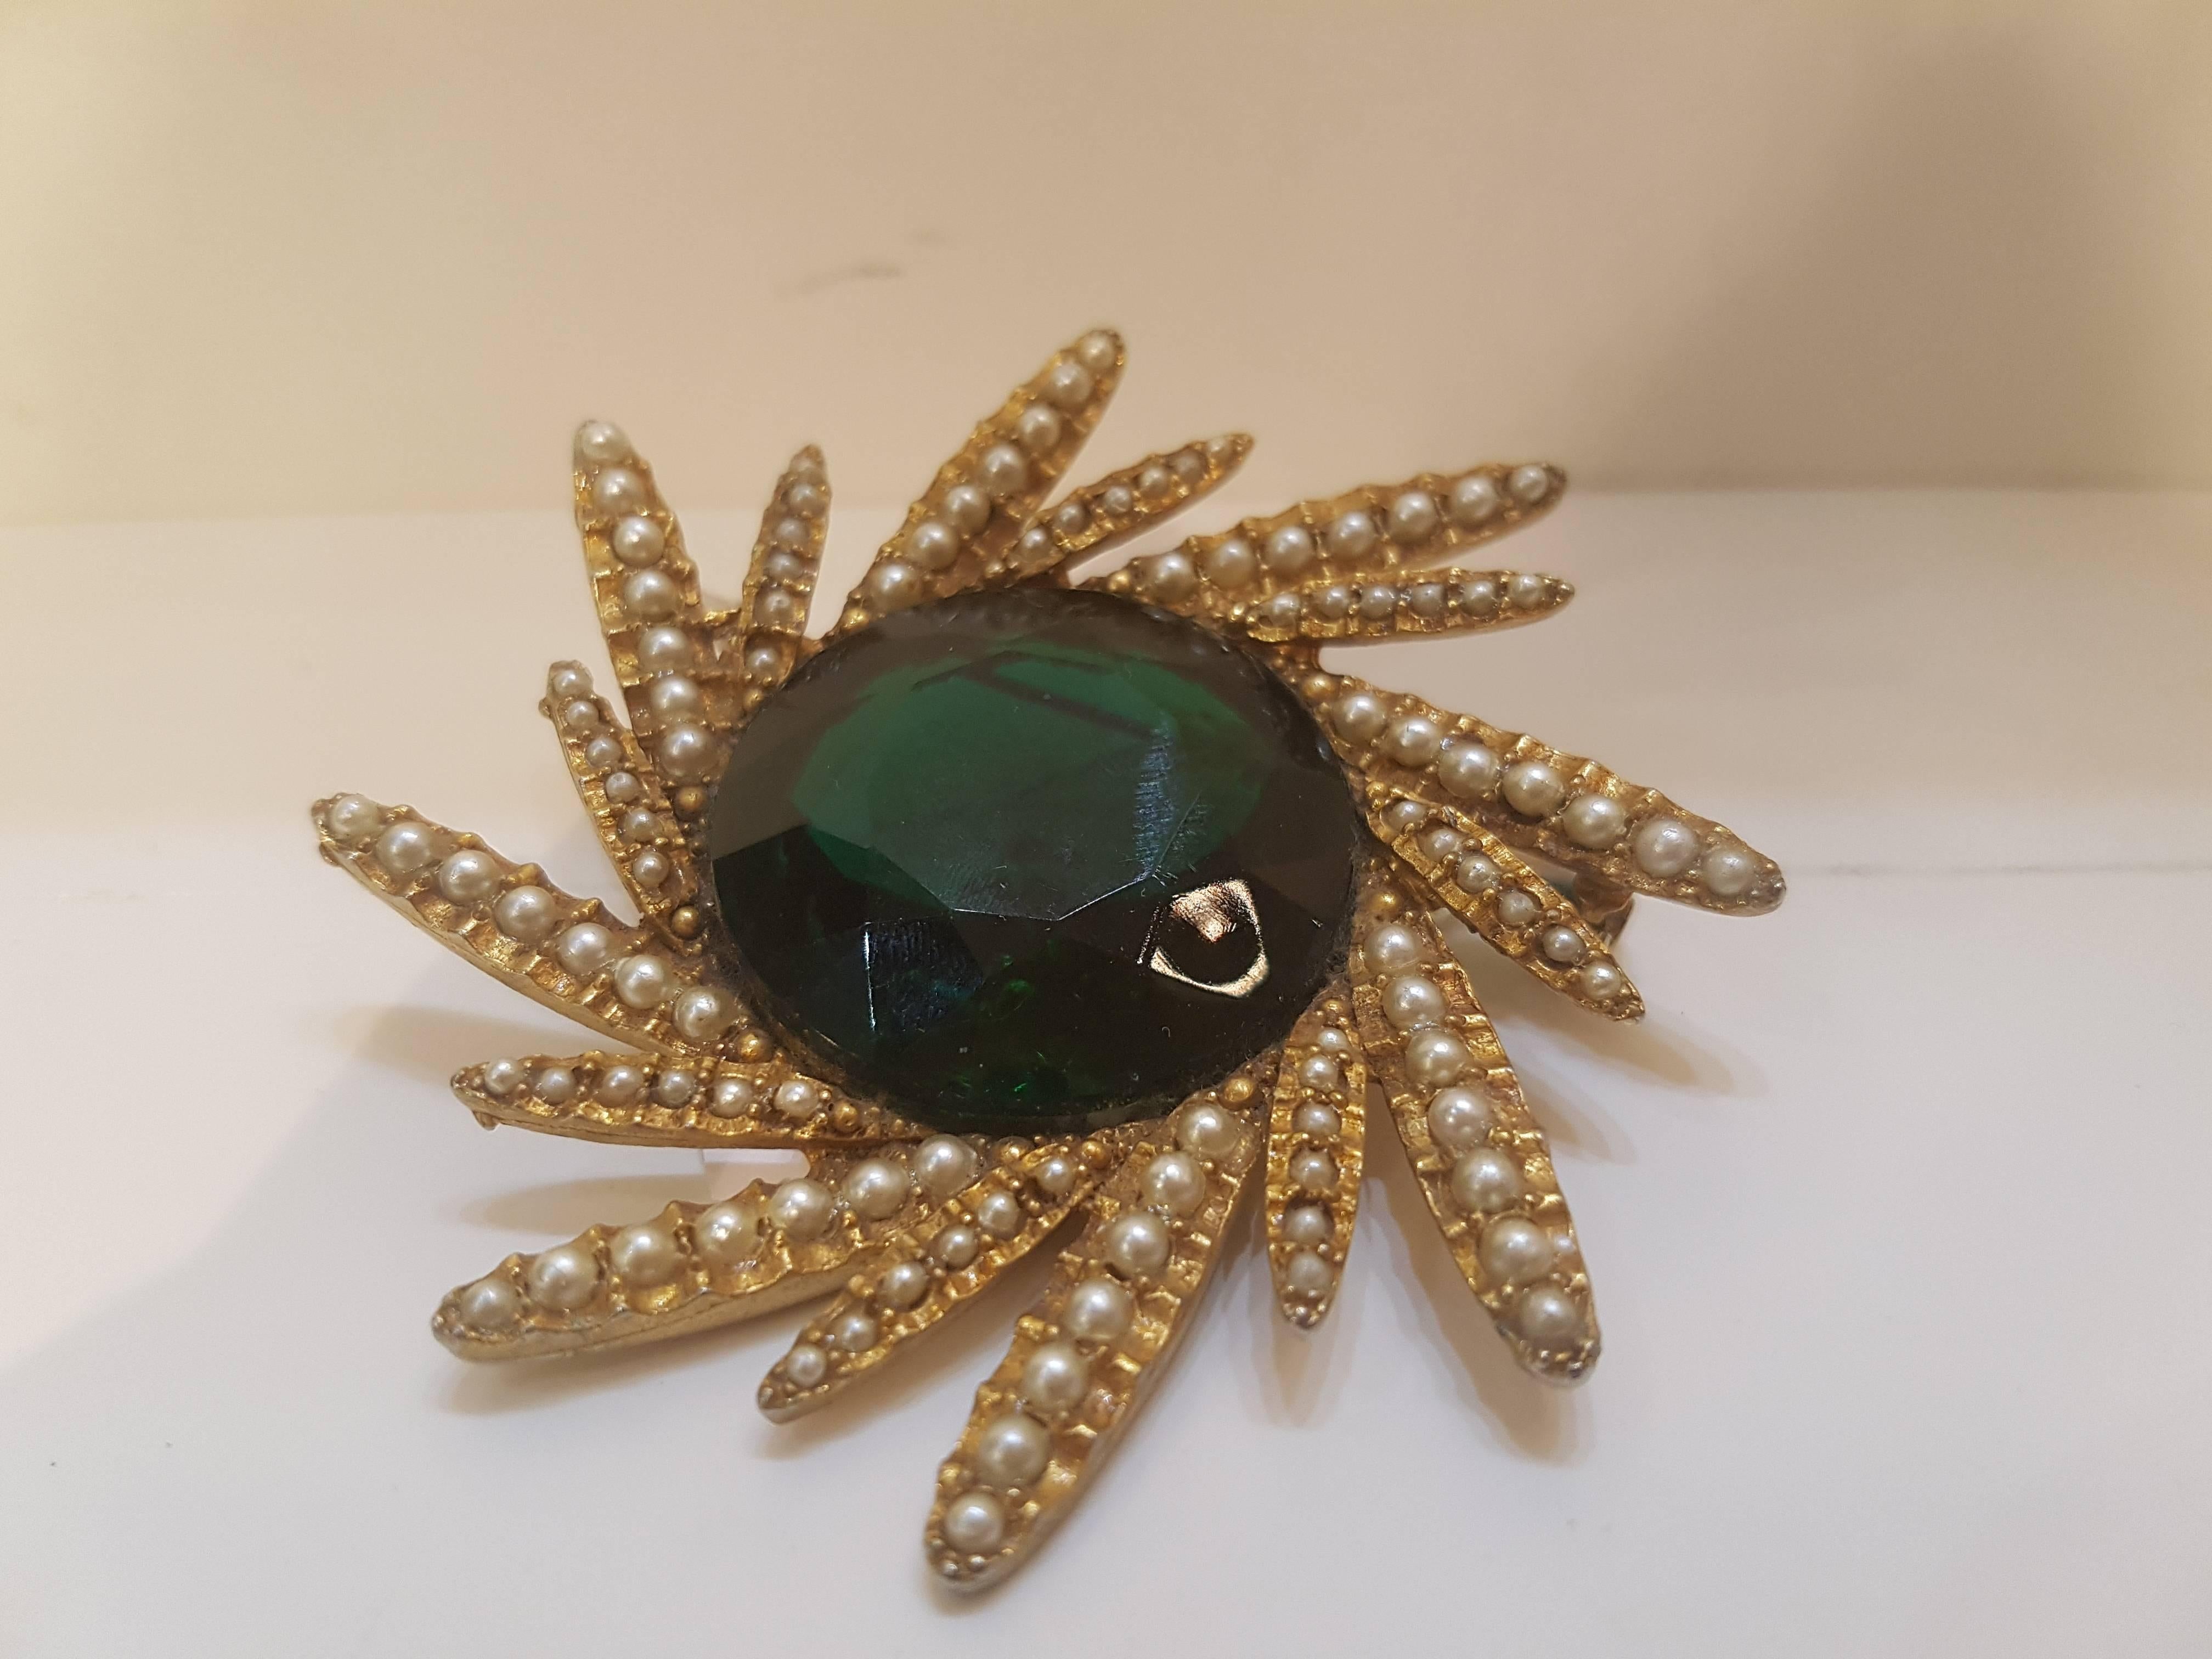 1980s Har Gold tone green ston brooch with aux pearls all aroung